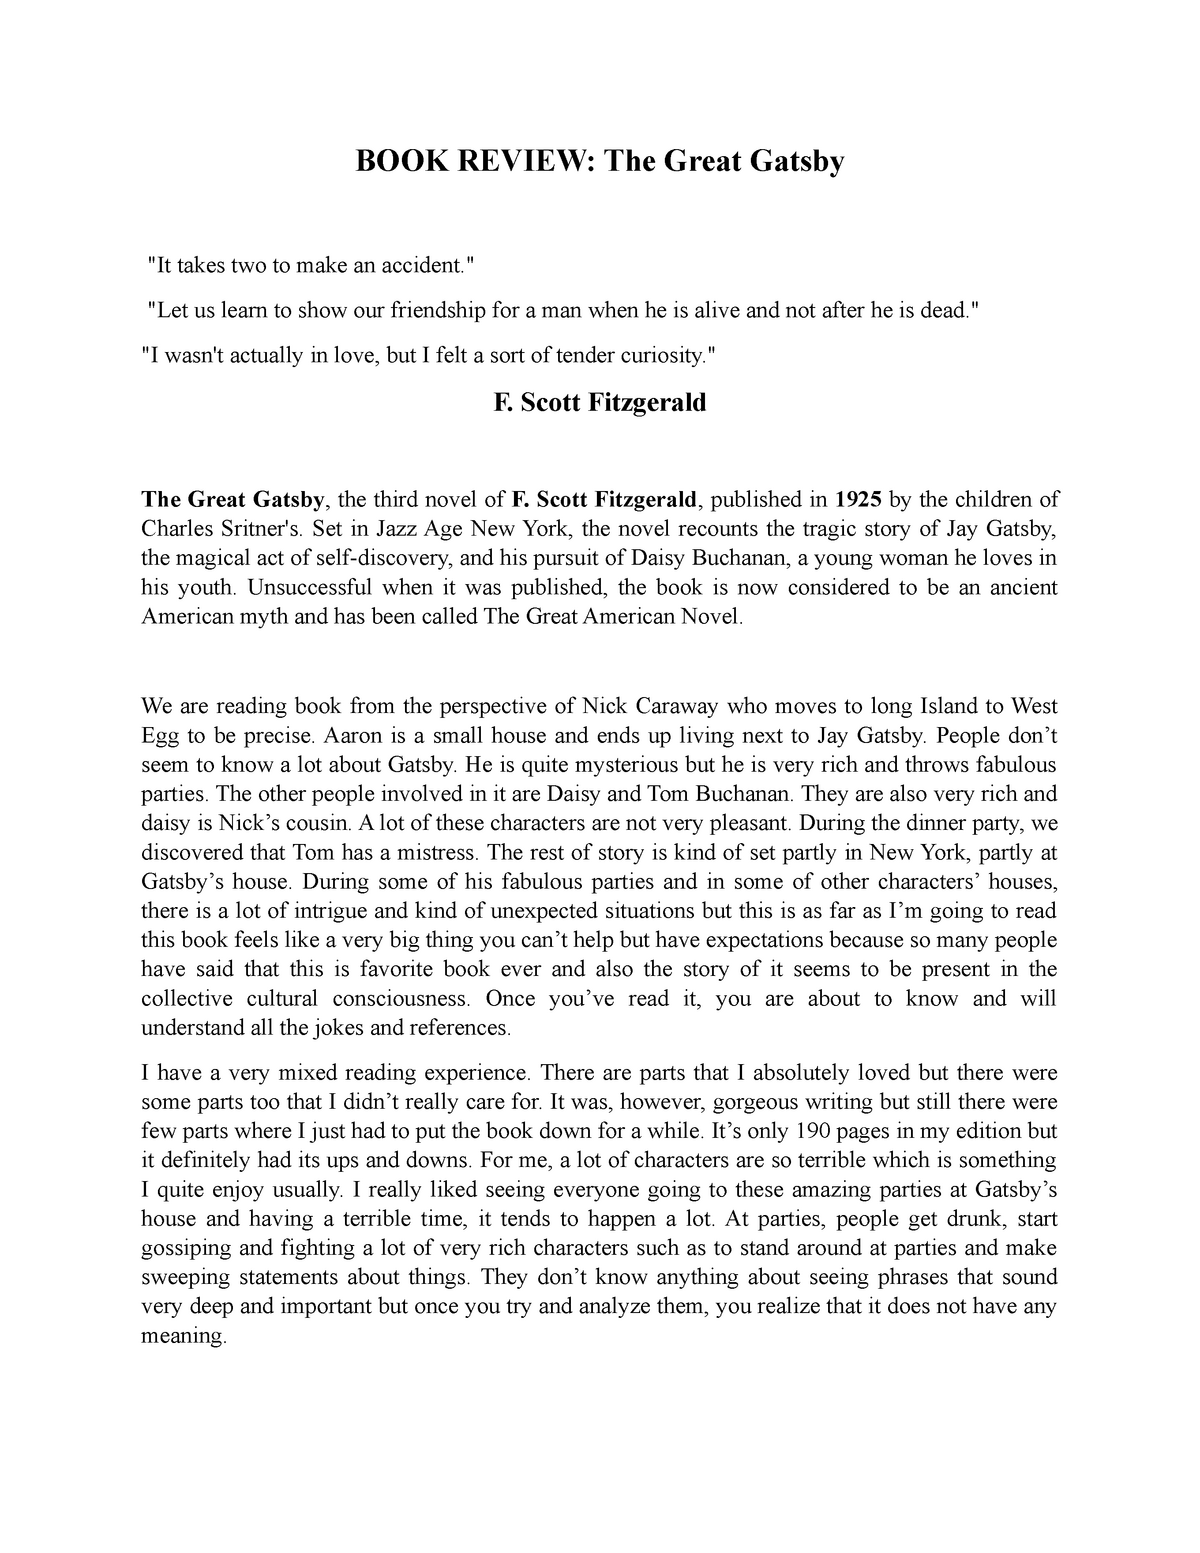 the great gatsby book review essay